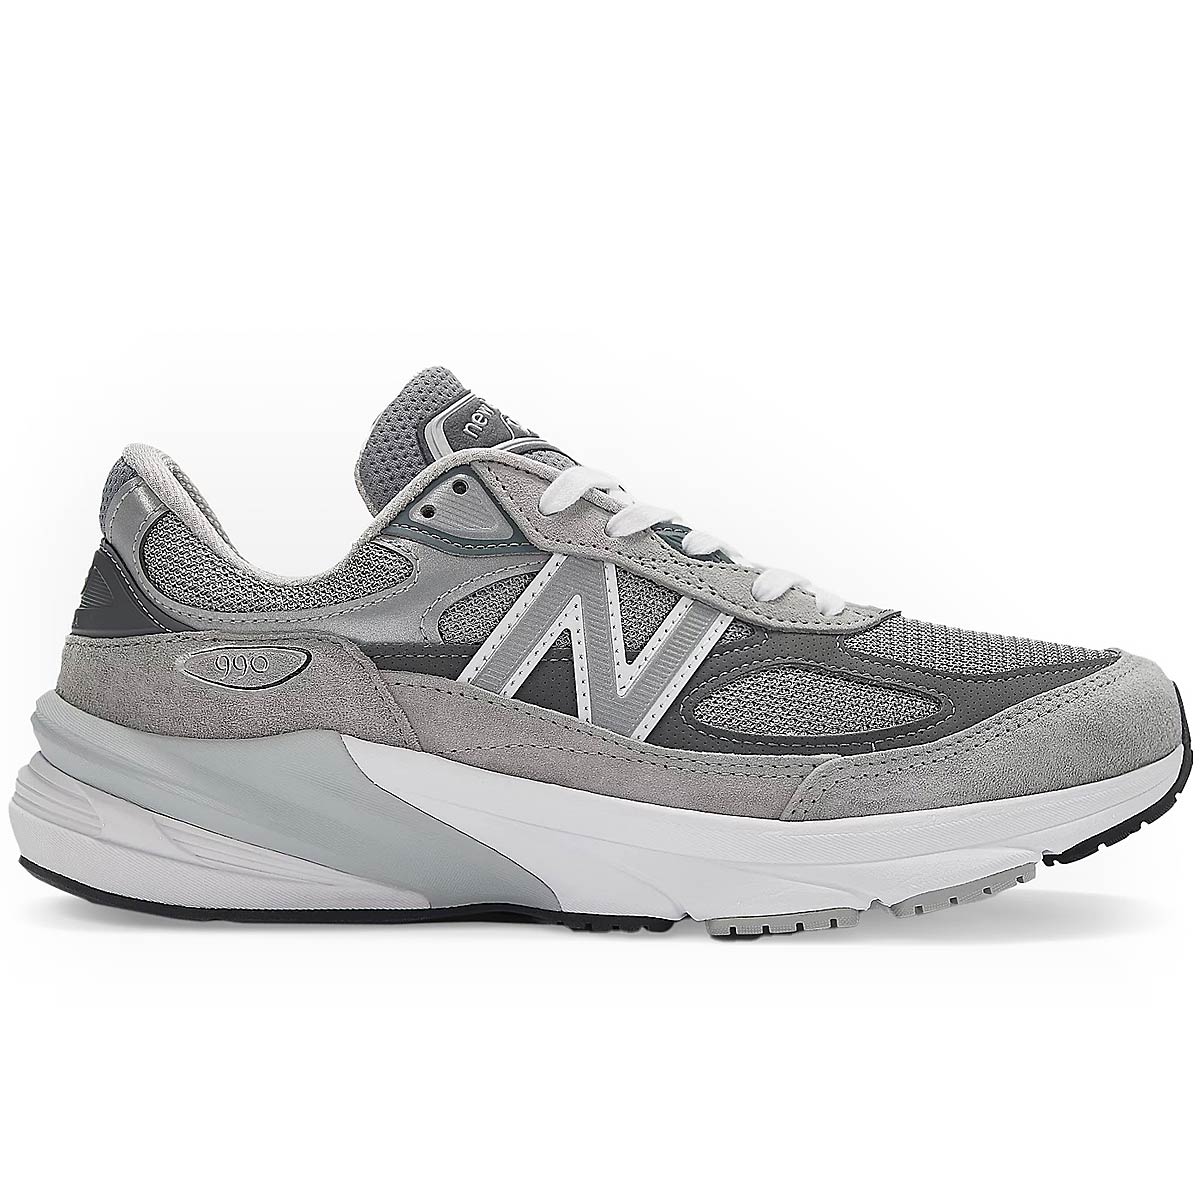 Buy Made in USA 990V6 for N/A 0.0 on KICKZ.com!